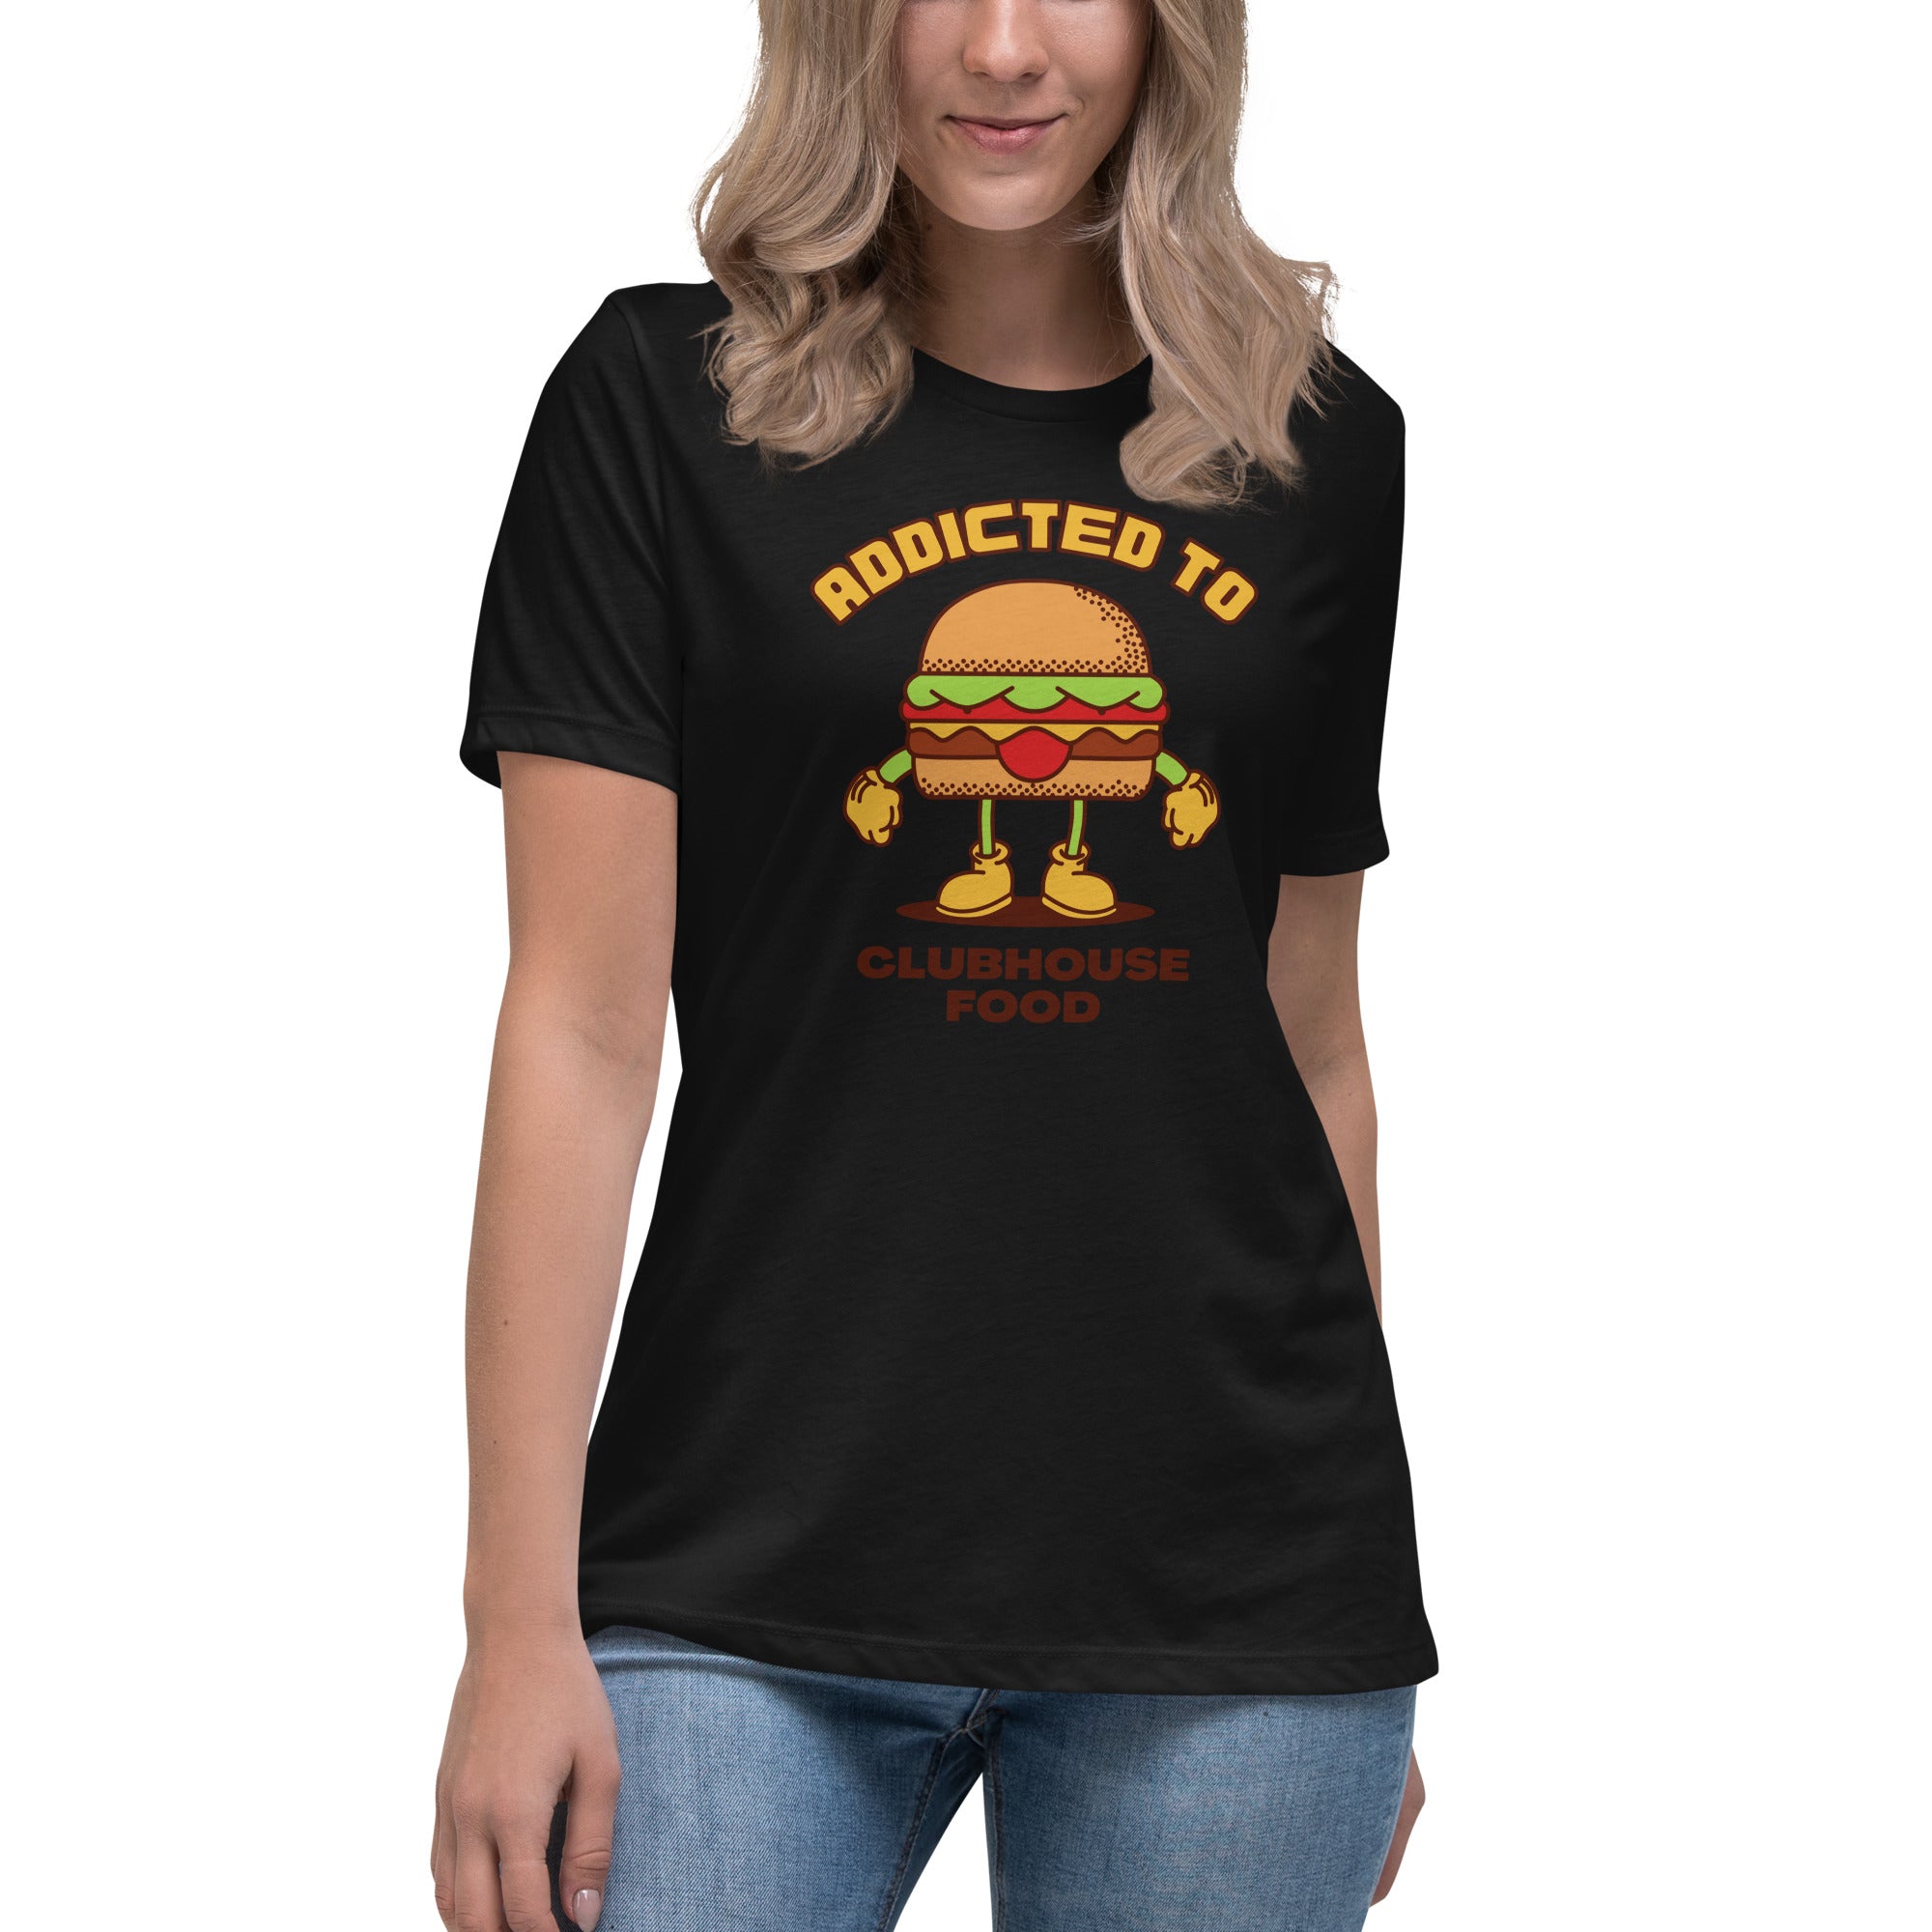 Addicted To Clubhouse Food Women's Premium T-Shirt